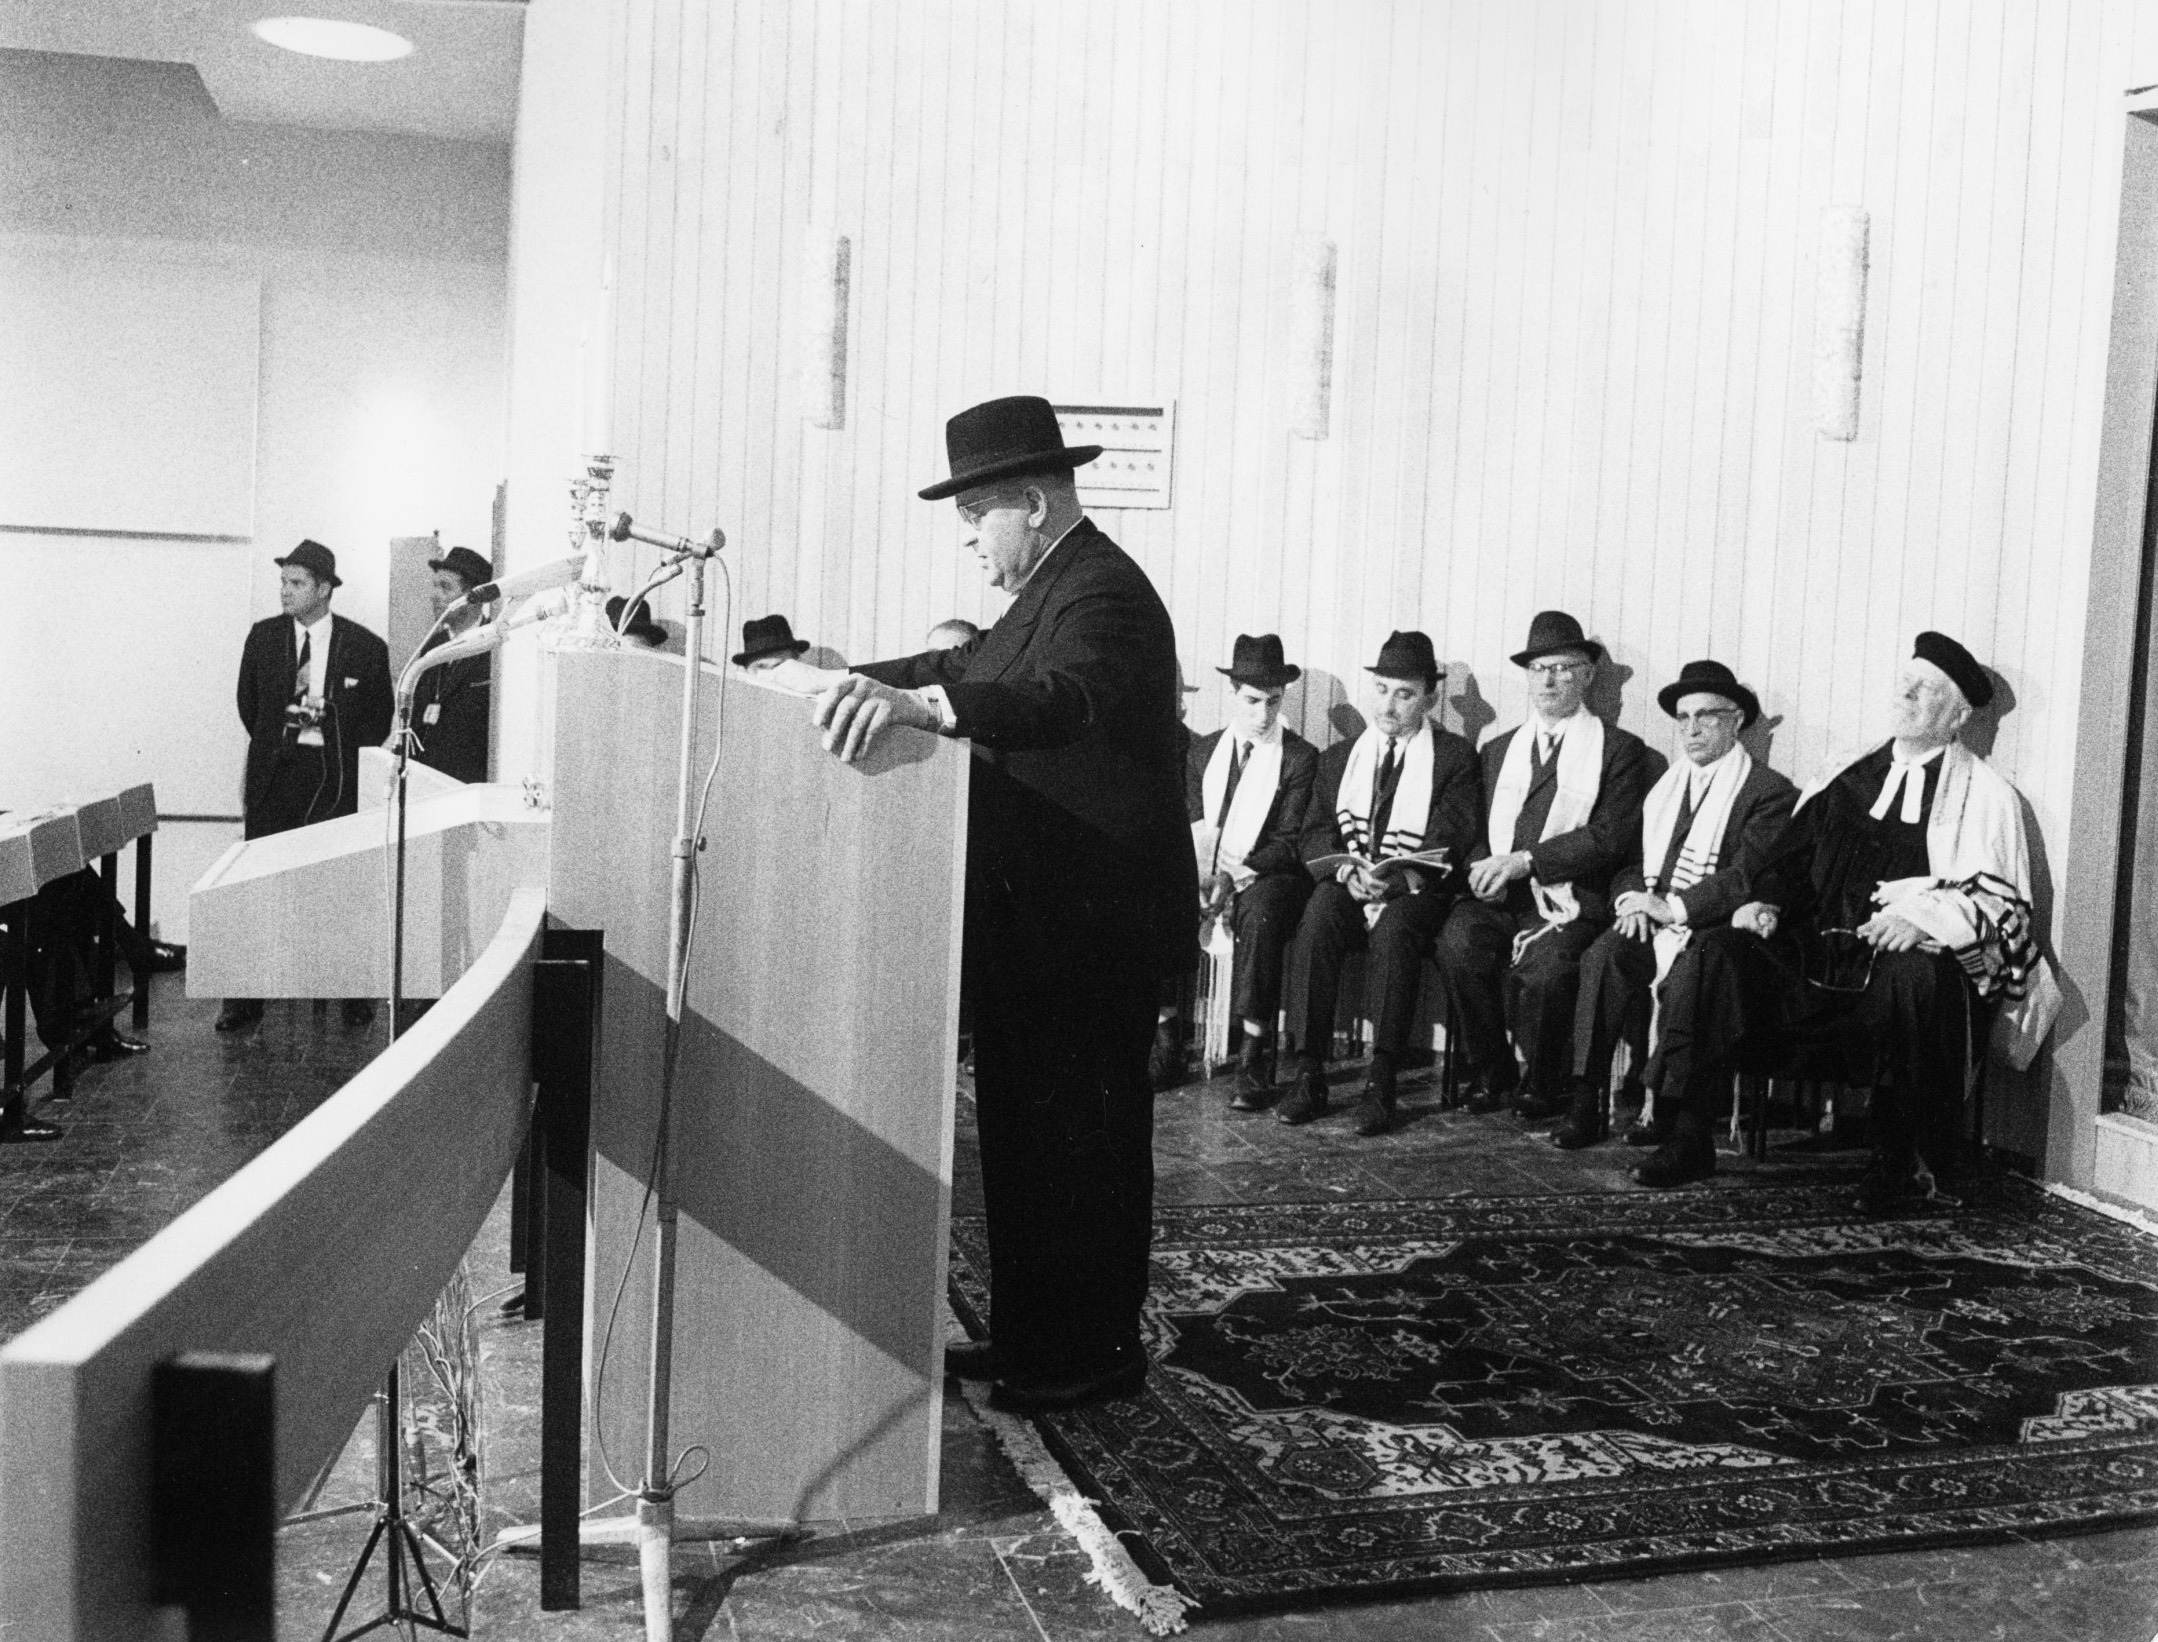 The mayor of Wiesbaden, Georg Buch, during his greeting at the inauguration of the synagogue in Wiesbaden. Photographer: Joachim B. Weber. StadtA WI, F000-499